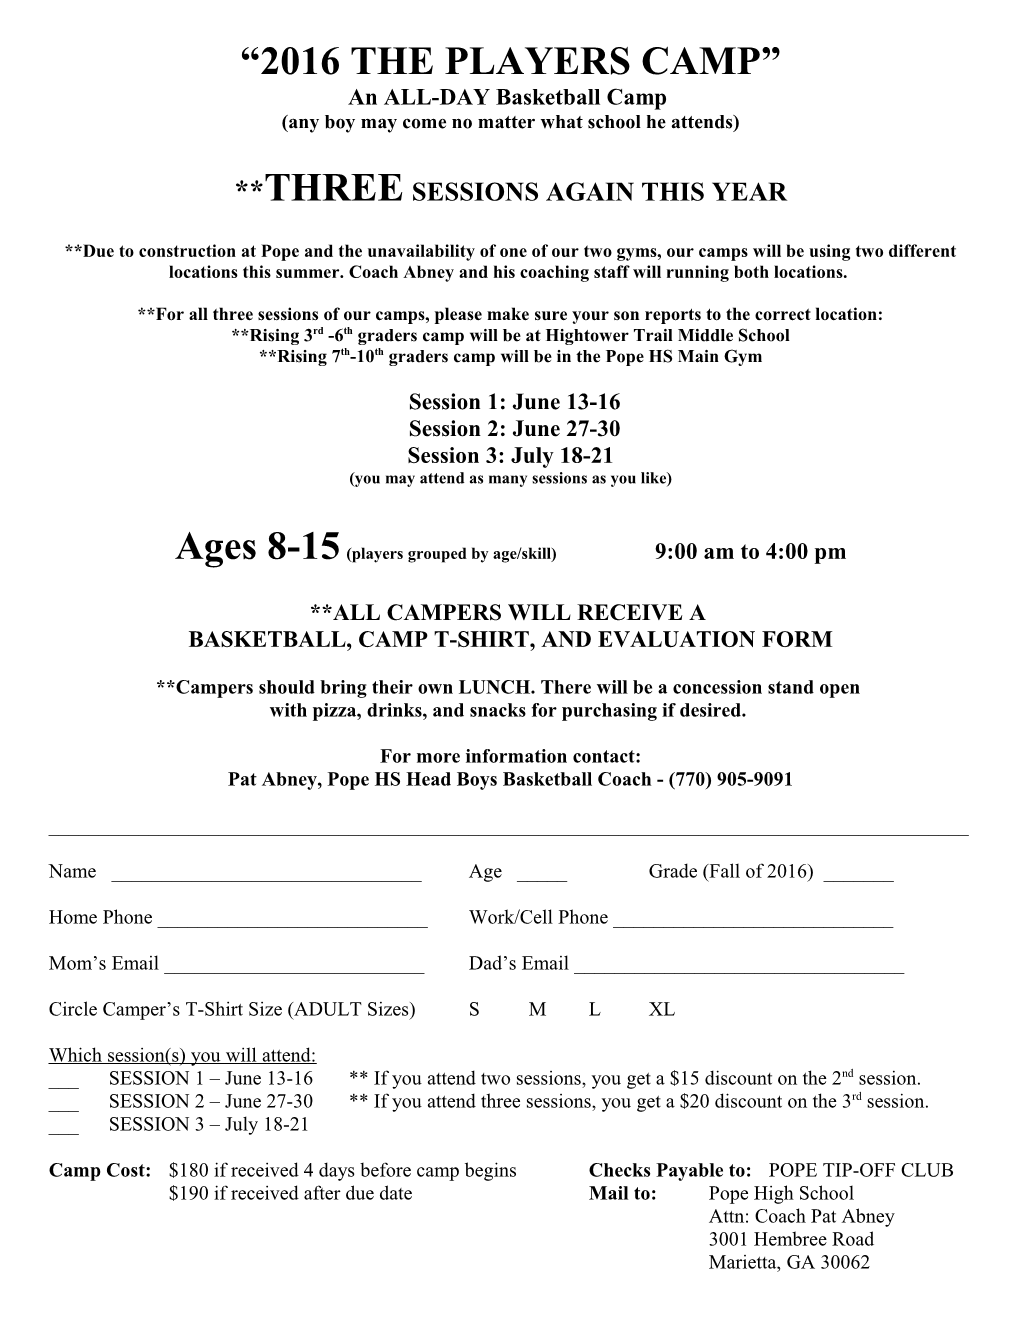 An ALL-DAY Basketball Camp